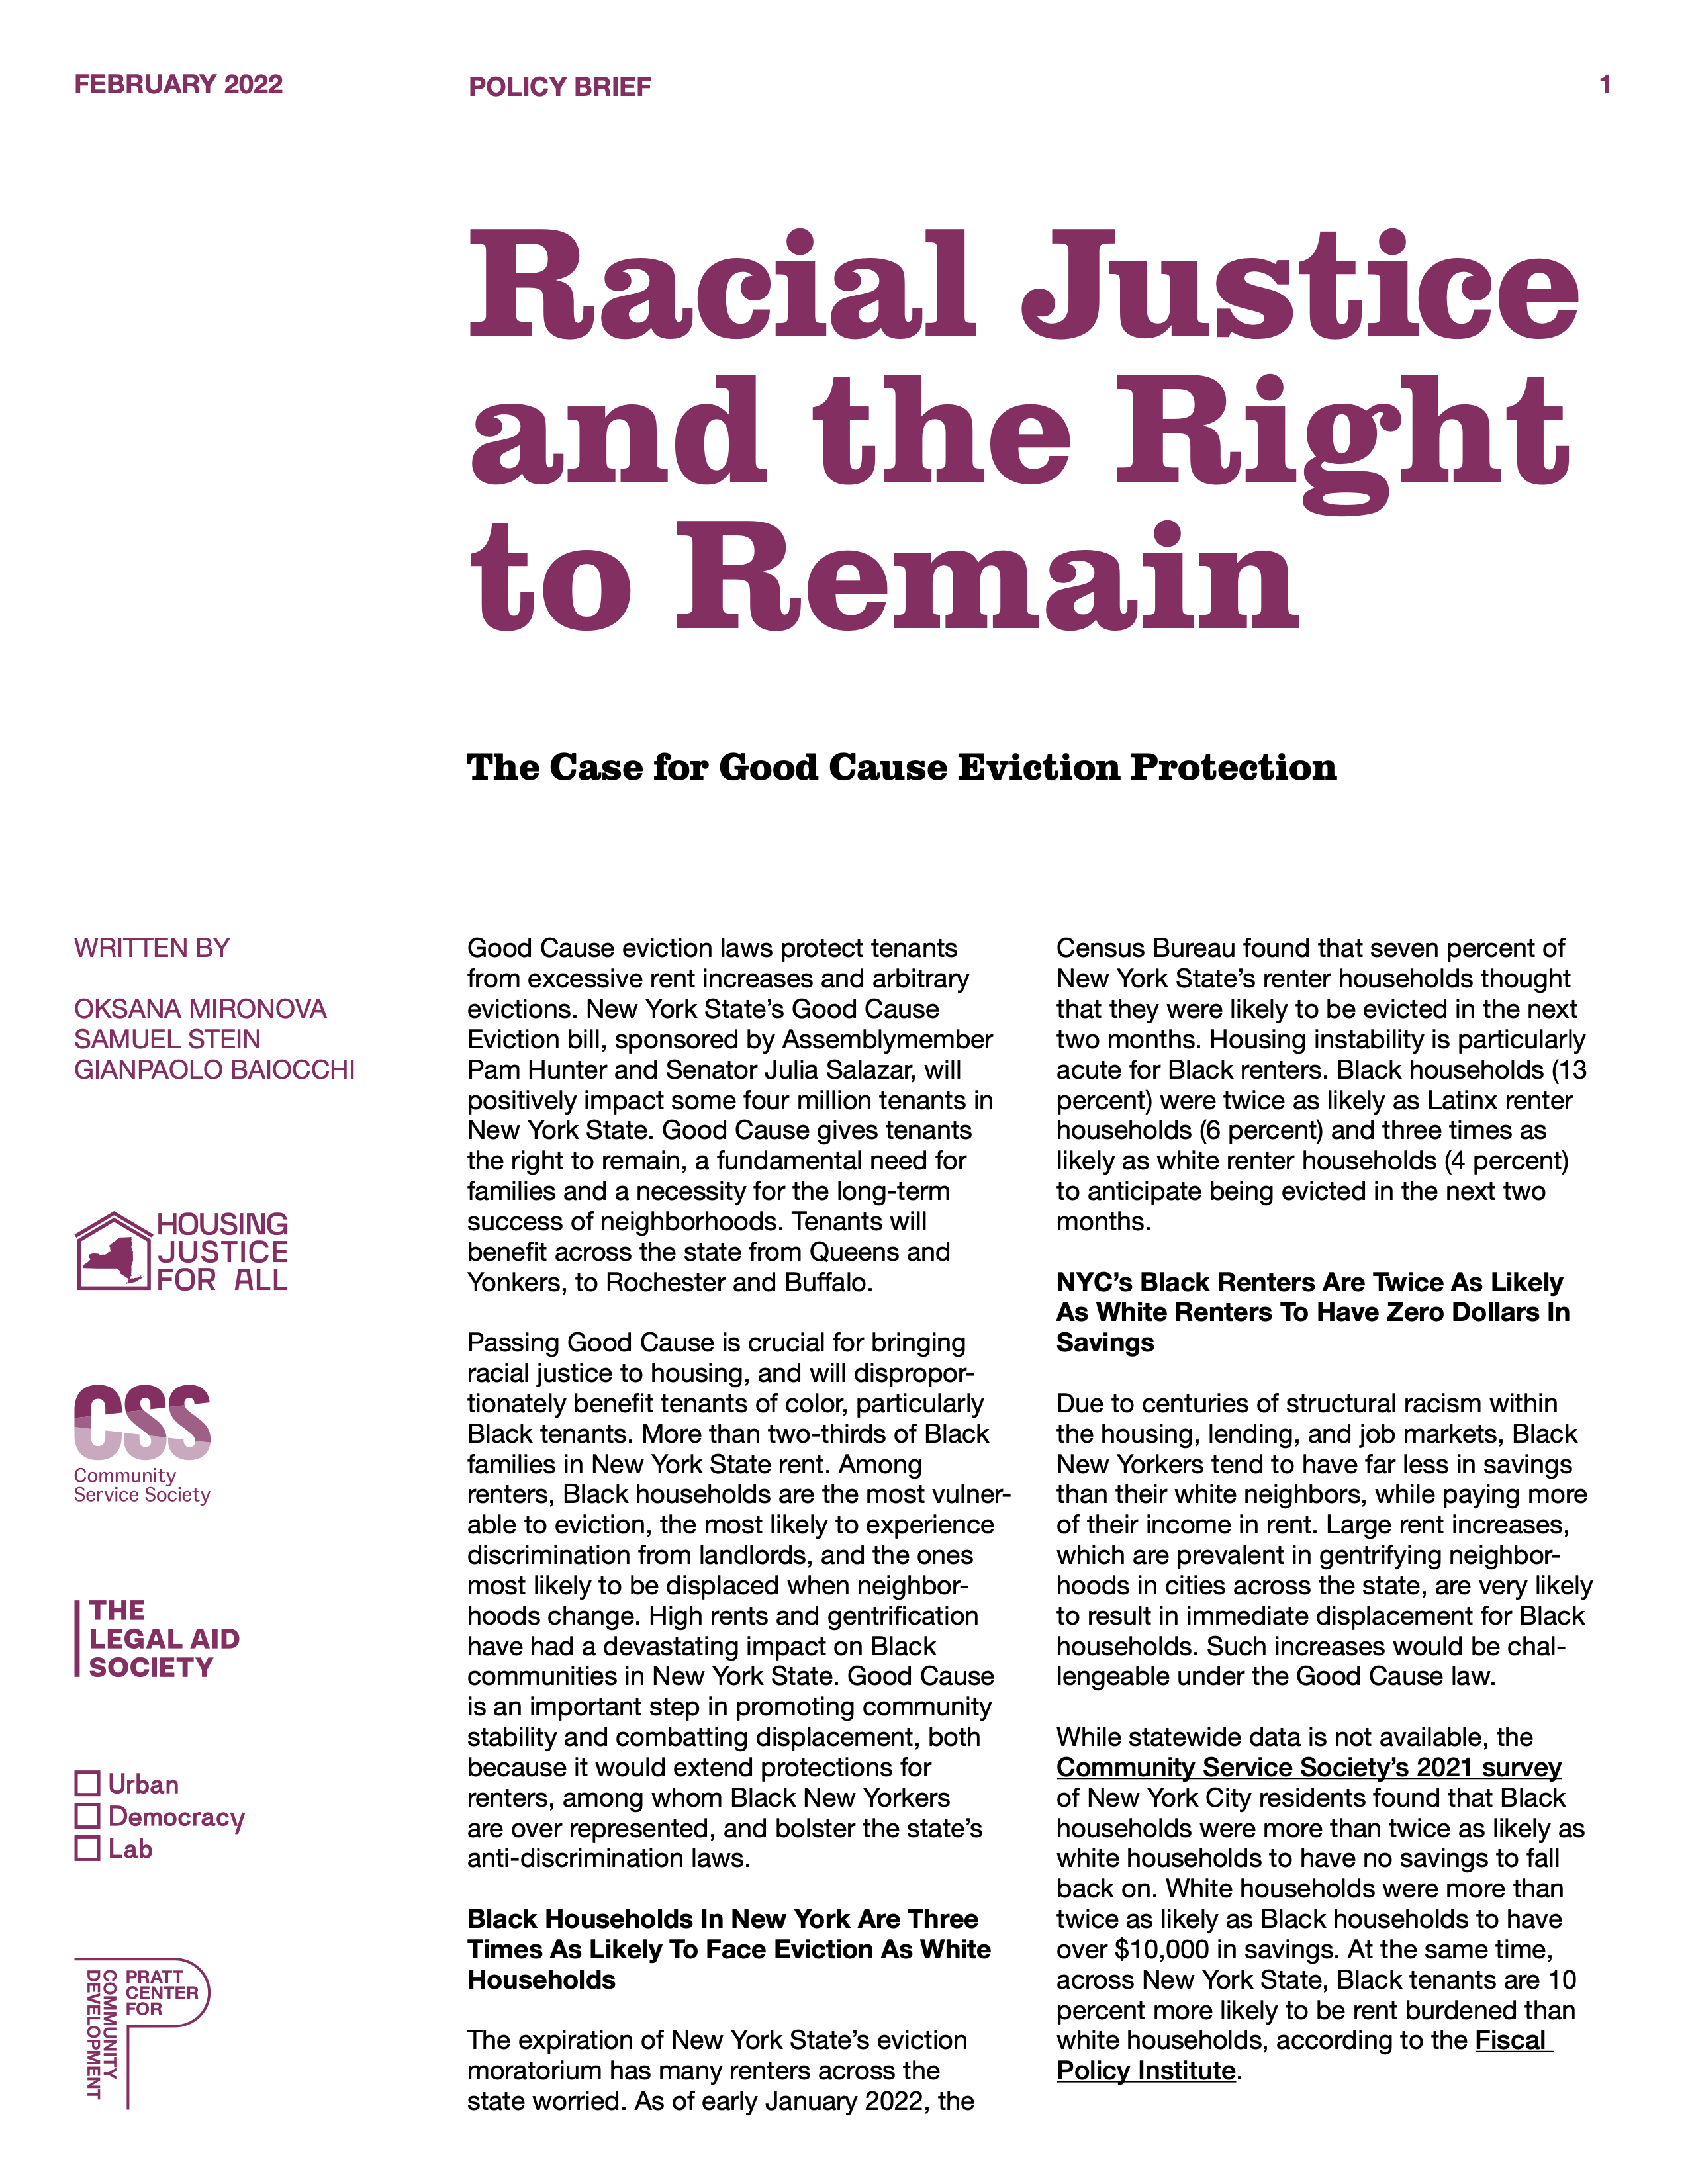 Racial Justice and the Right to Remain